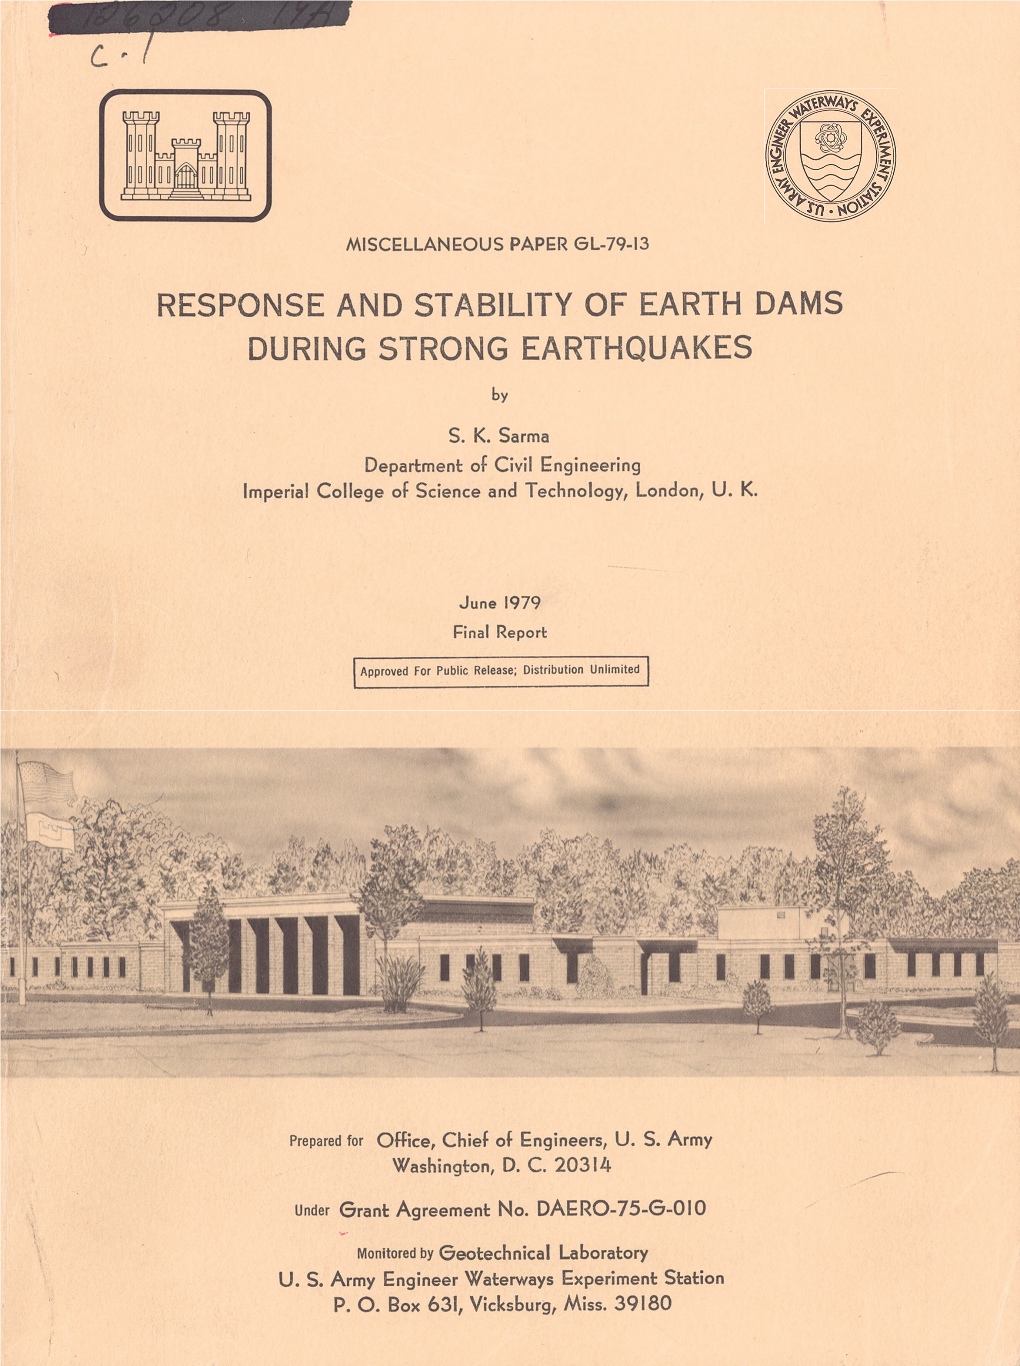 Response and Stability of Earth Dams During Strong Earthquakes: Final